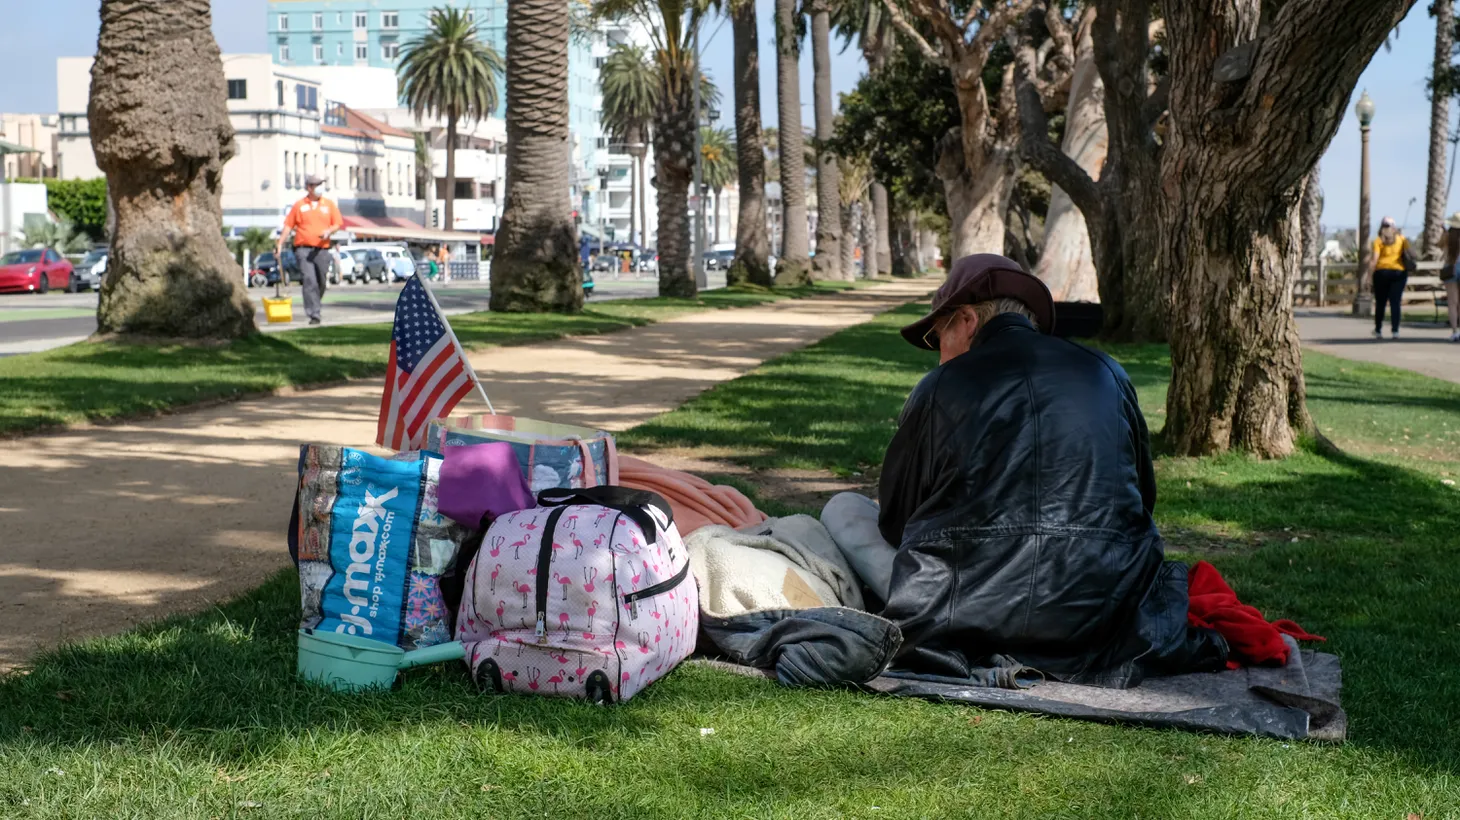 A homeless person sits in Palisades Park, Santa Monica, California, July 25, 2022. “The first thing this new mayor is going to have to do is level with people that however good their ideas are, they cannot do this [fix the homelessness crisis] by themselves. There's just too much overlap between the city and county on this issue. And I hope they address that sooner rather than later,” says Raphe Sonenshein, executive director of the Pat Brown Institute for Public Affairs at Cal State LA.